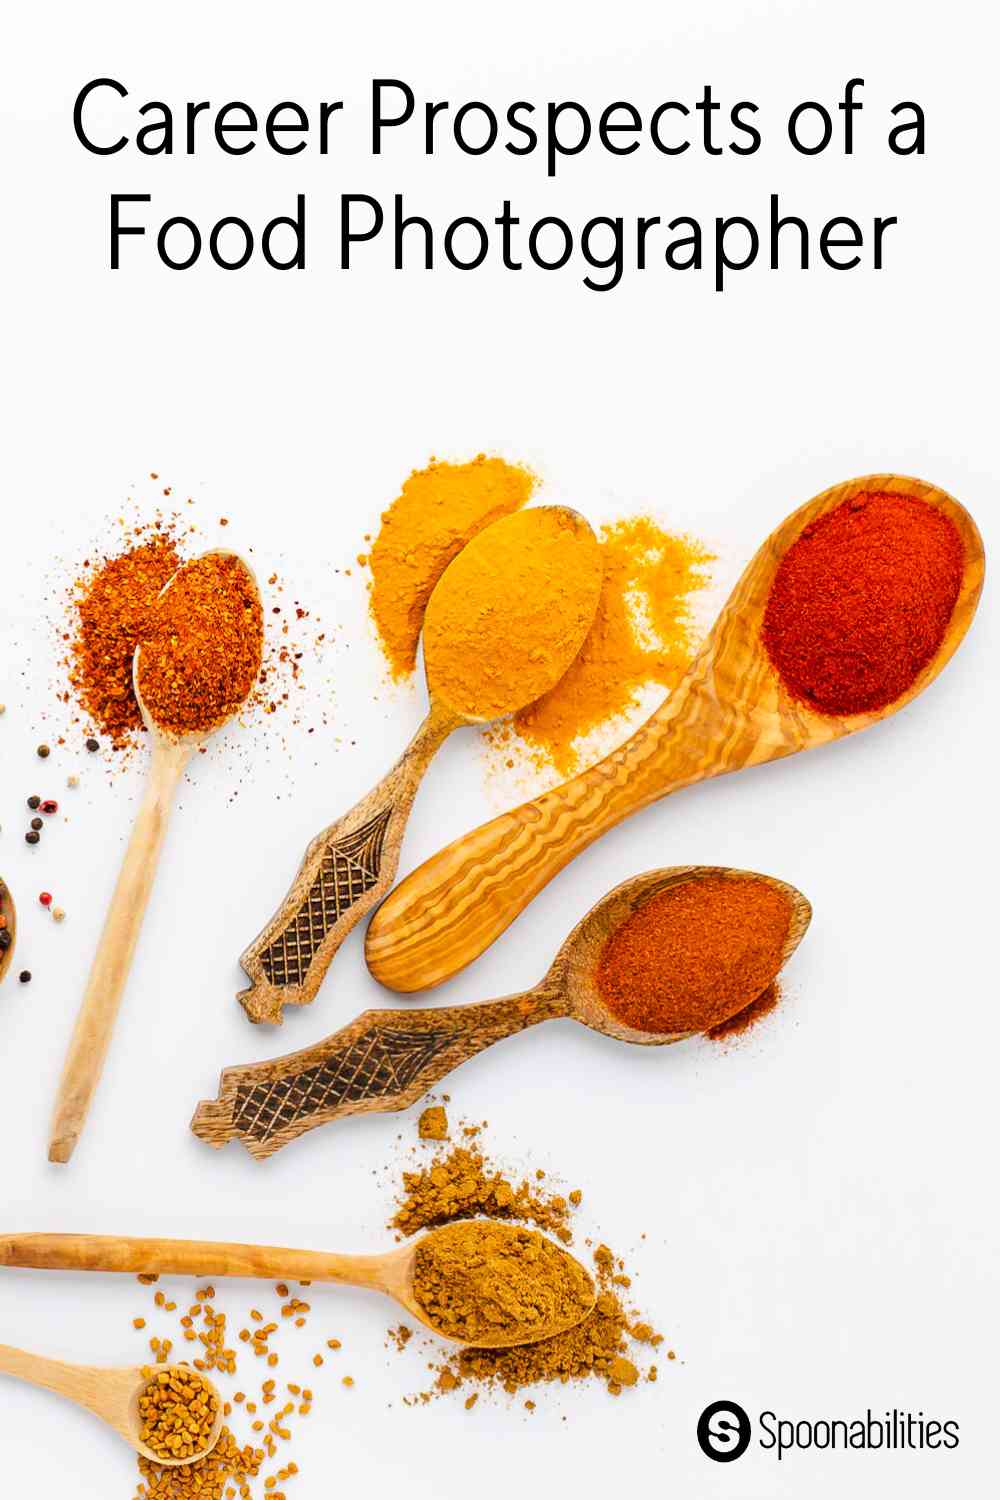 Career and Work Prospects of a Food Photographer